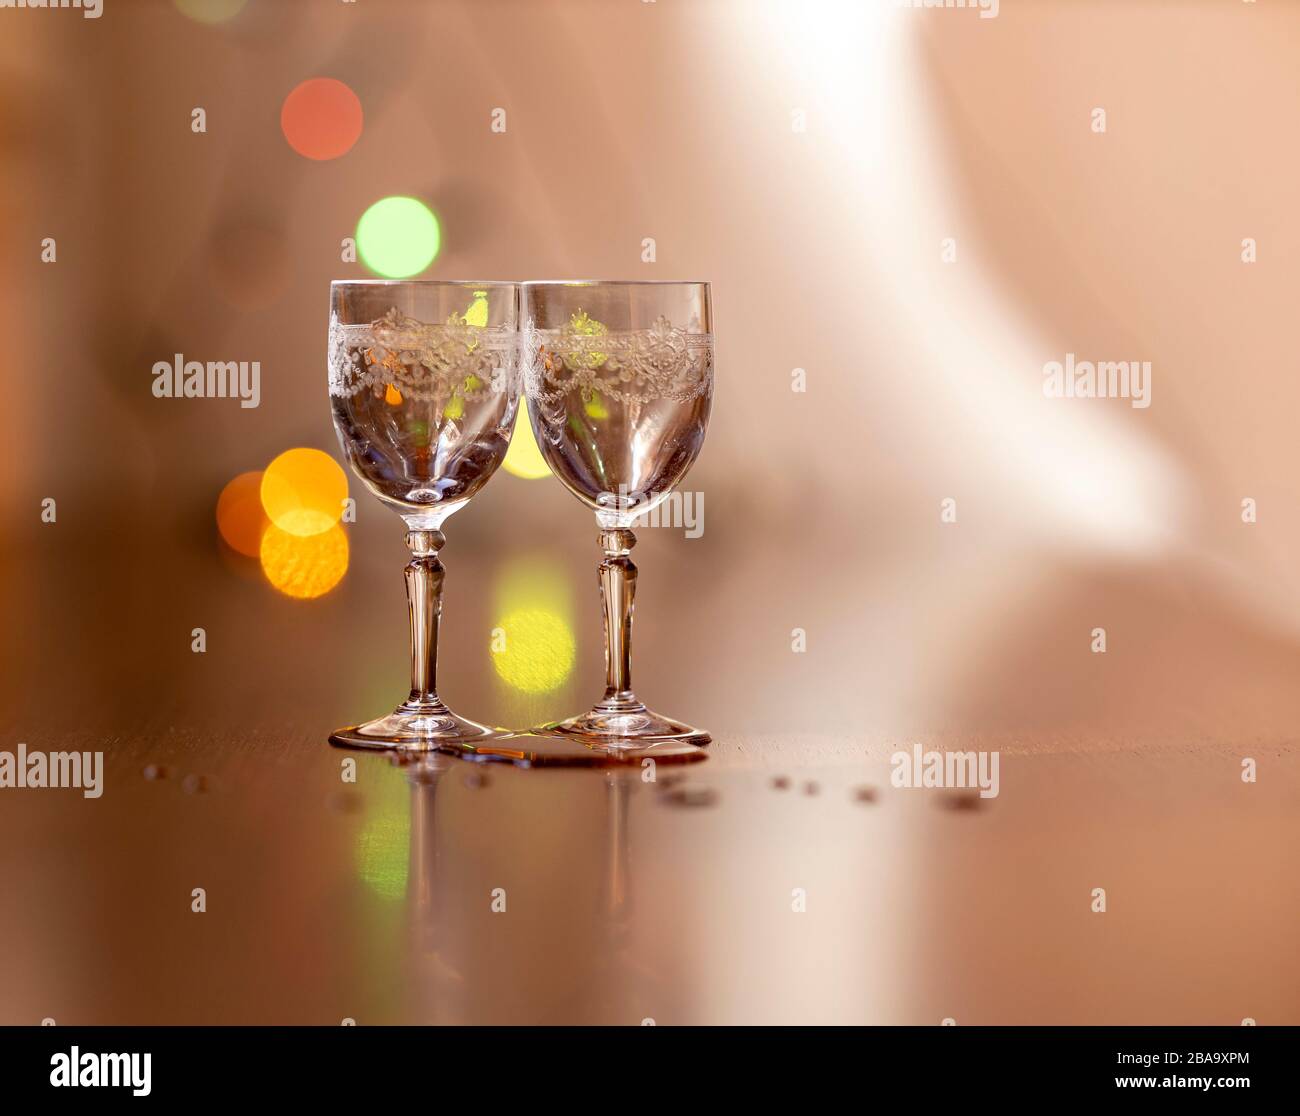 Everything prepared for a party, glasses, masks, lights and fruit with Stock Photo